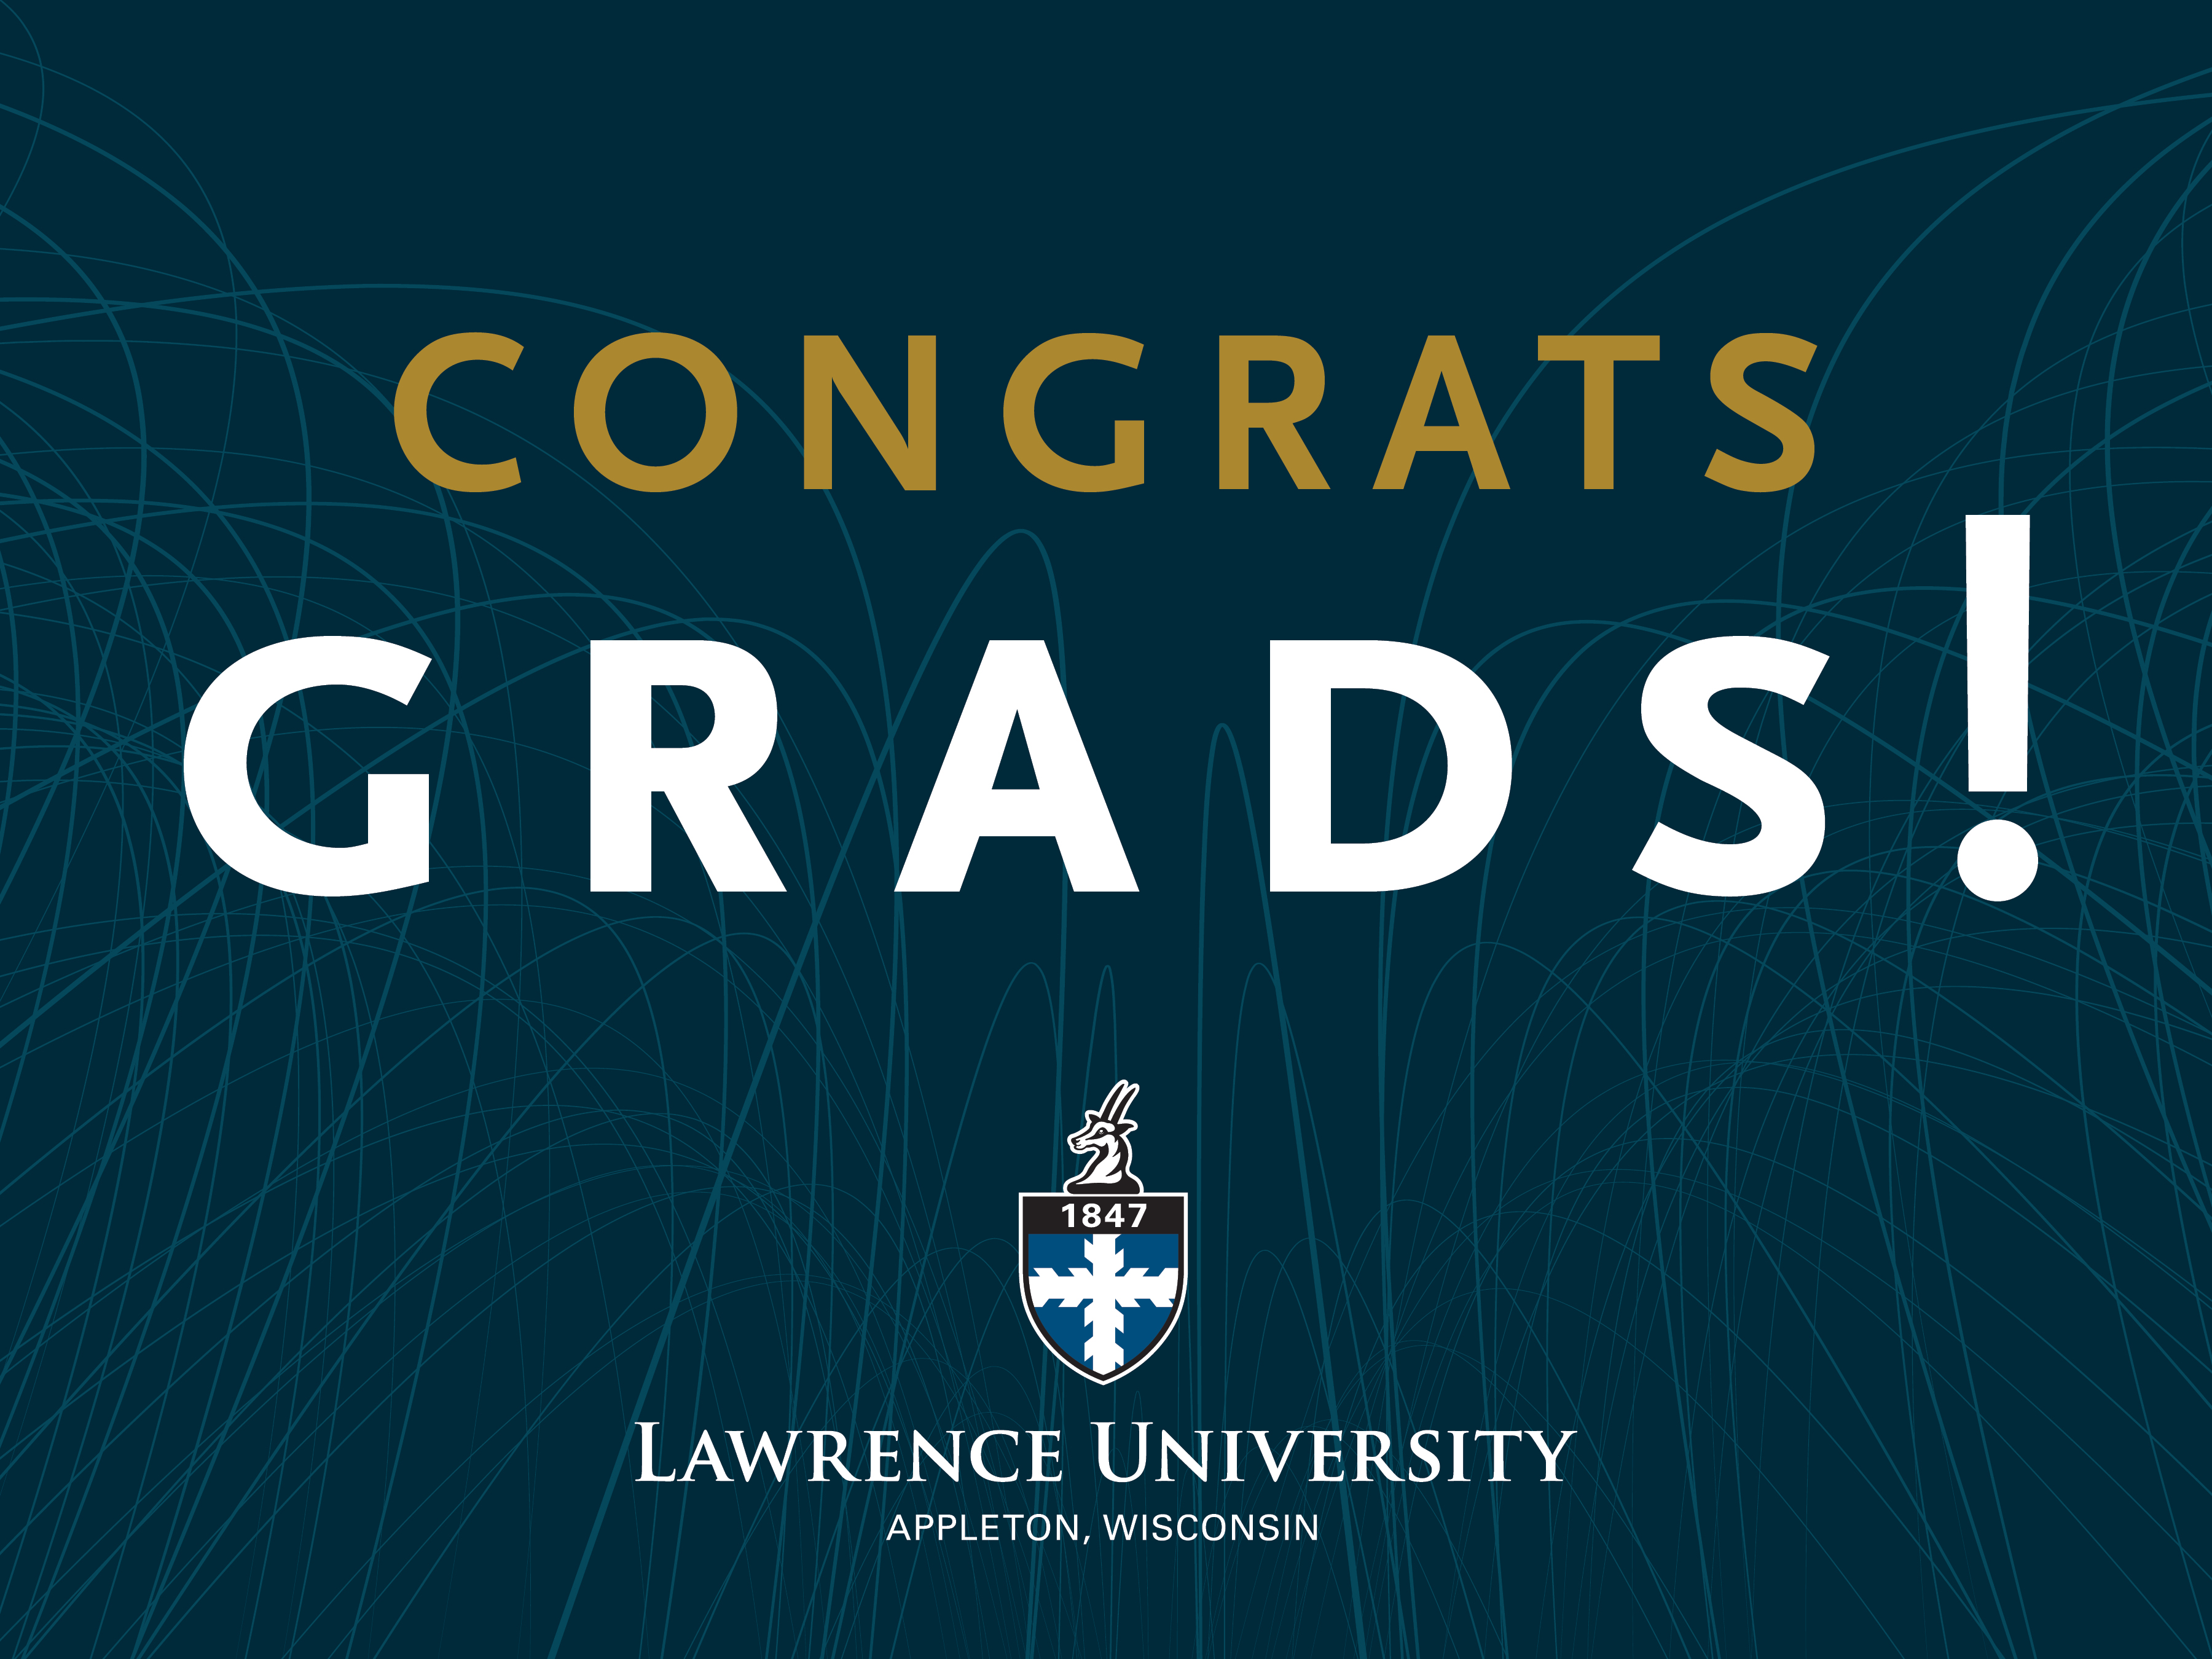 Lawrence University crest with words "Congrats grads! Lawrence University Appleton, Wisconsin."